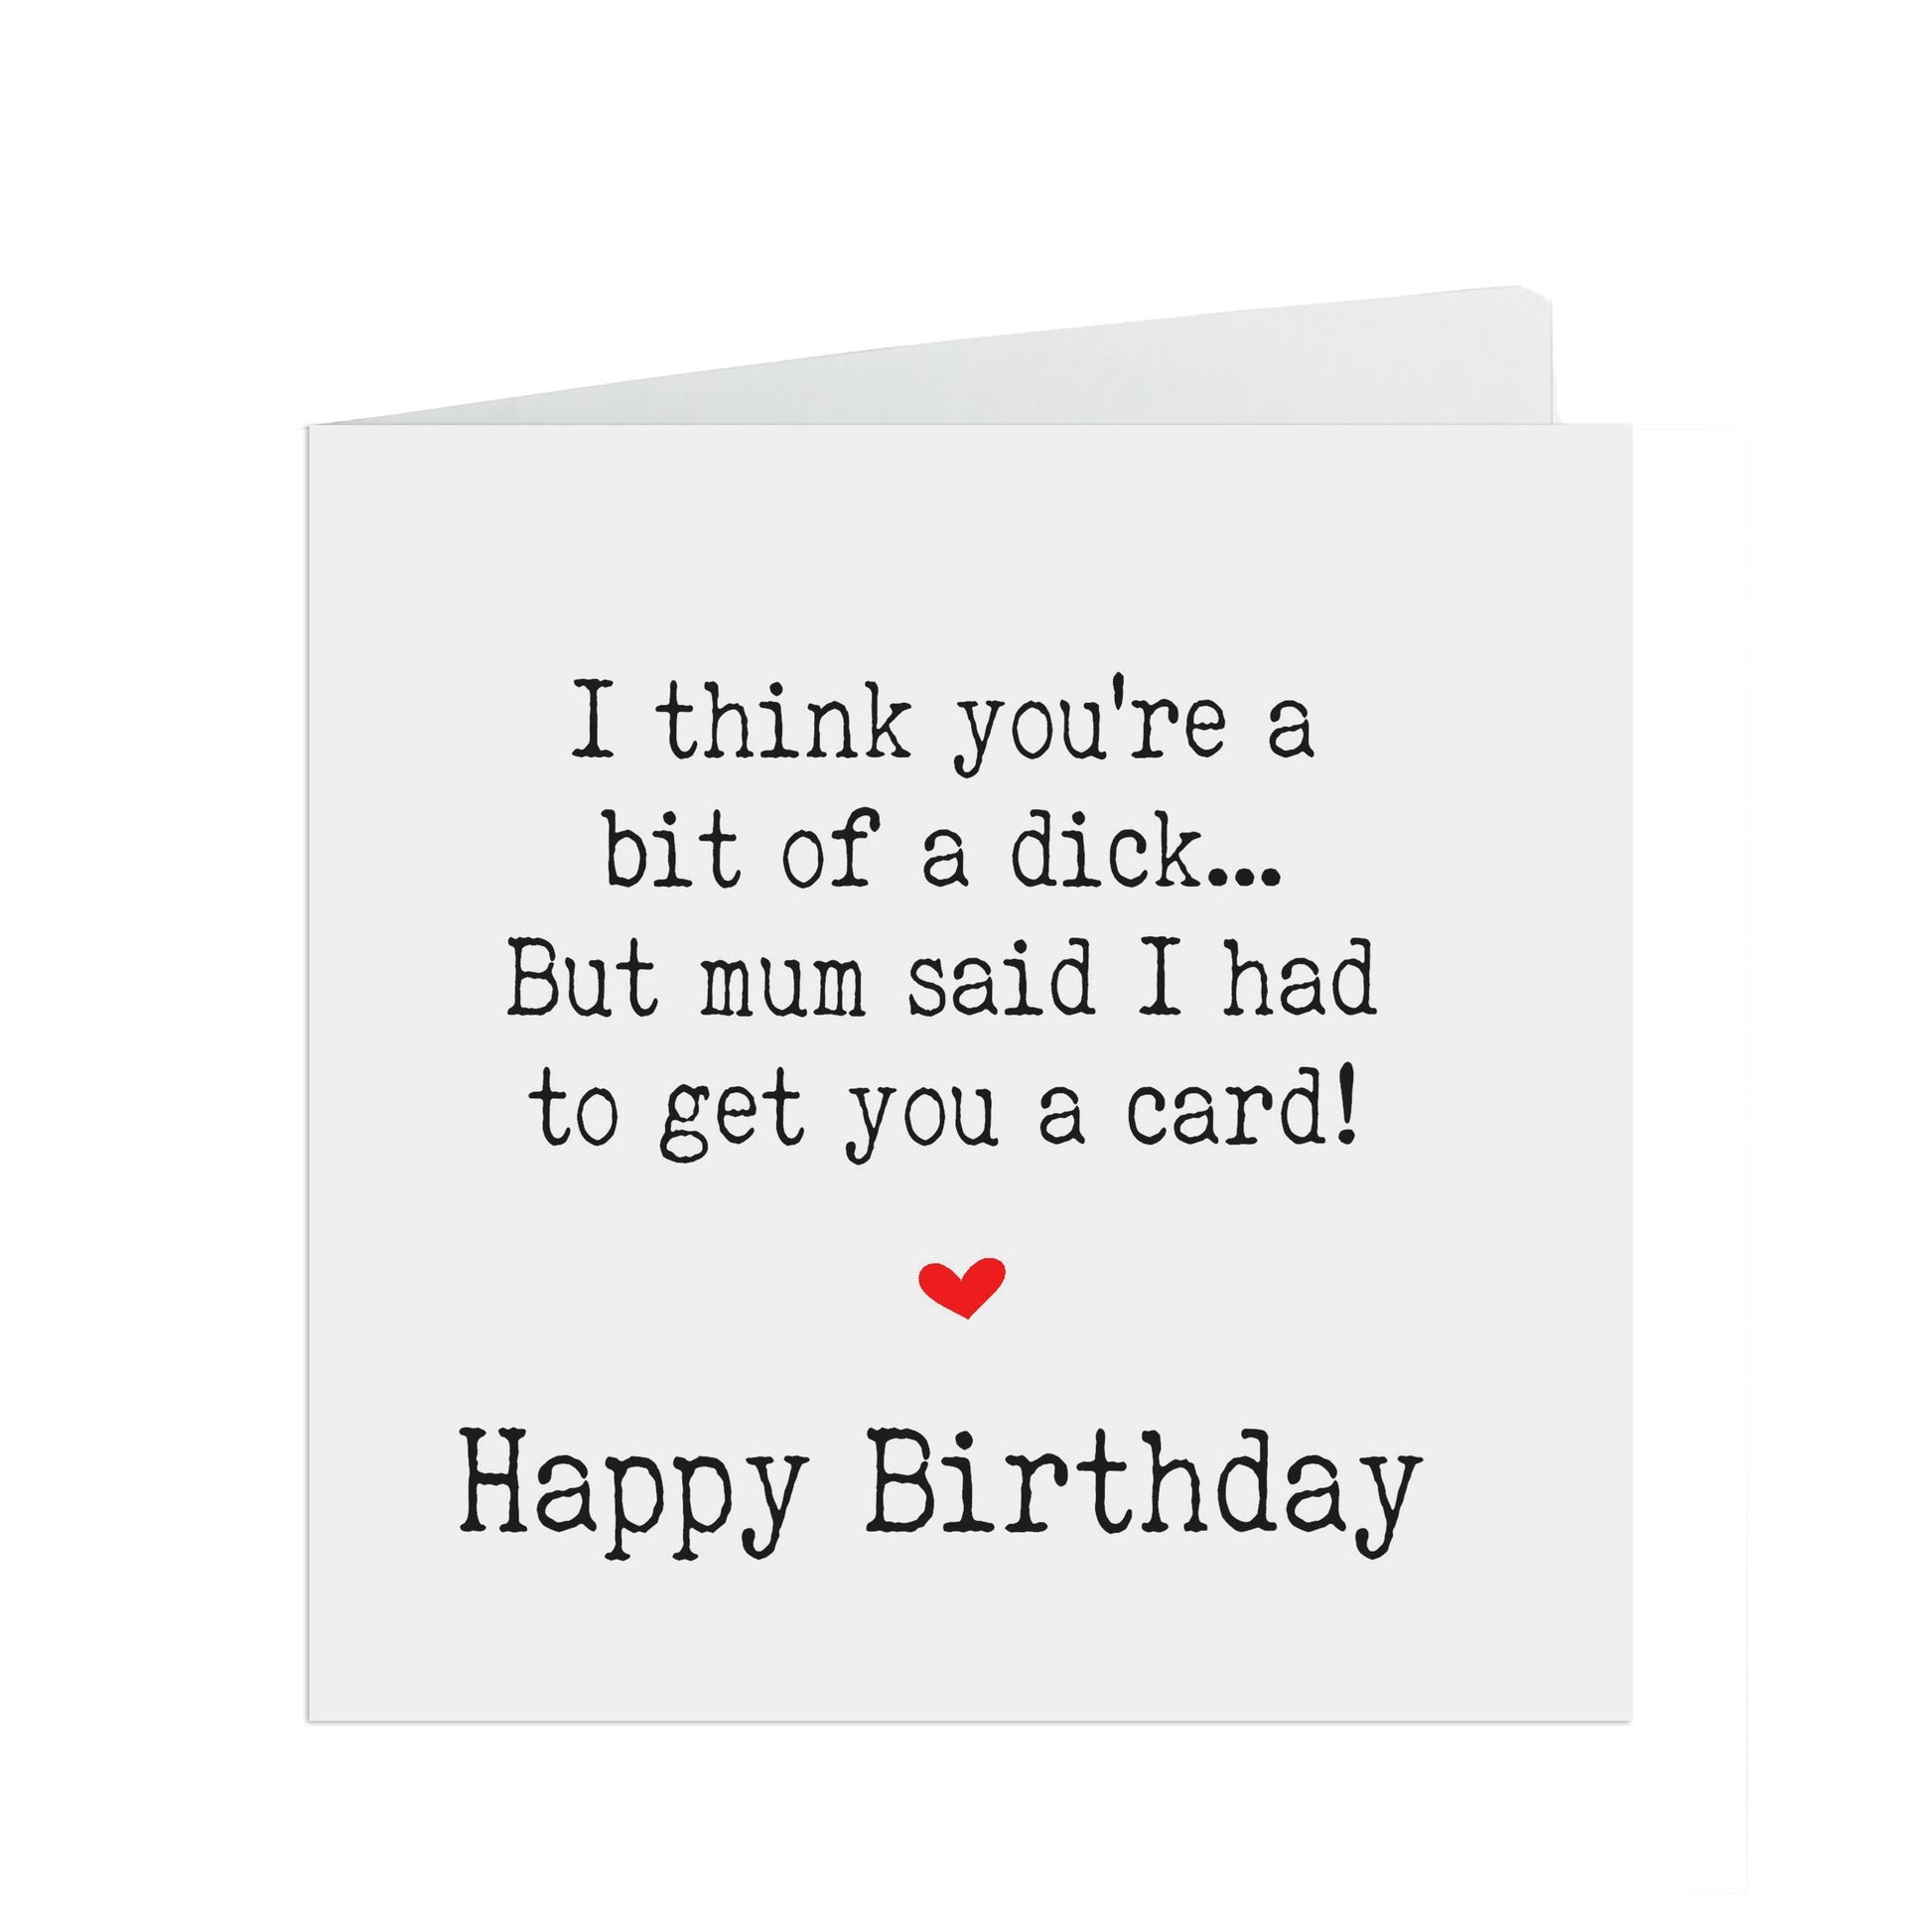 Funny Birthday Card, I Think You're A Dick, Mum Said I Had To Get You A Card